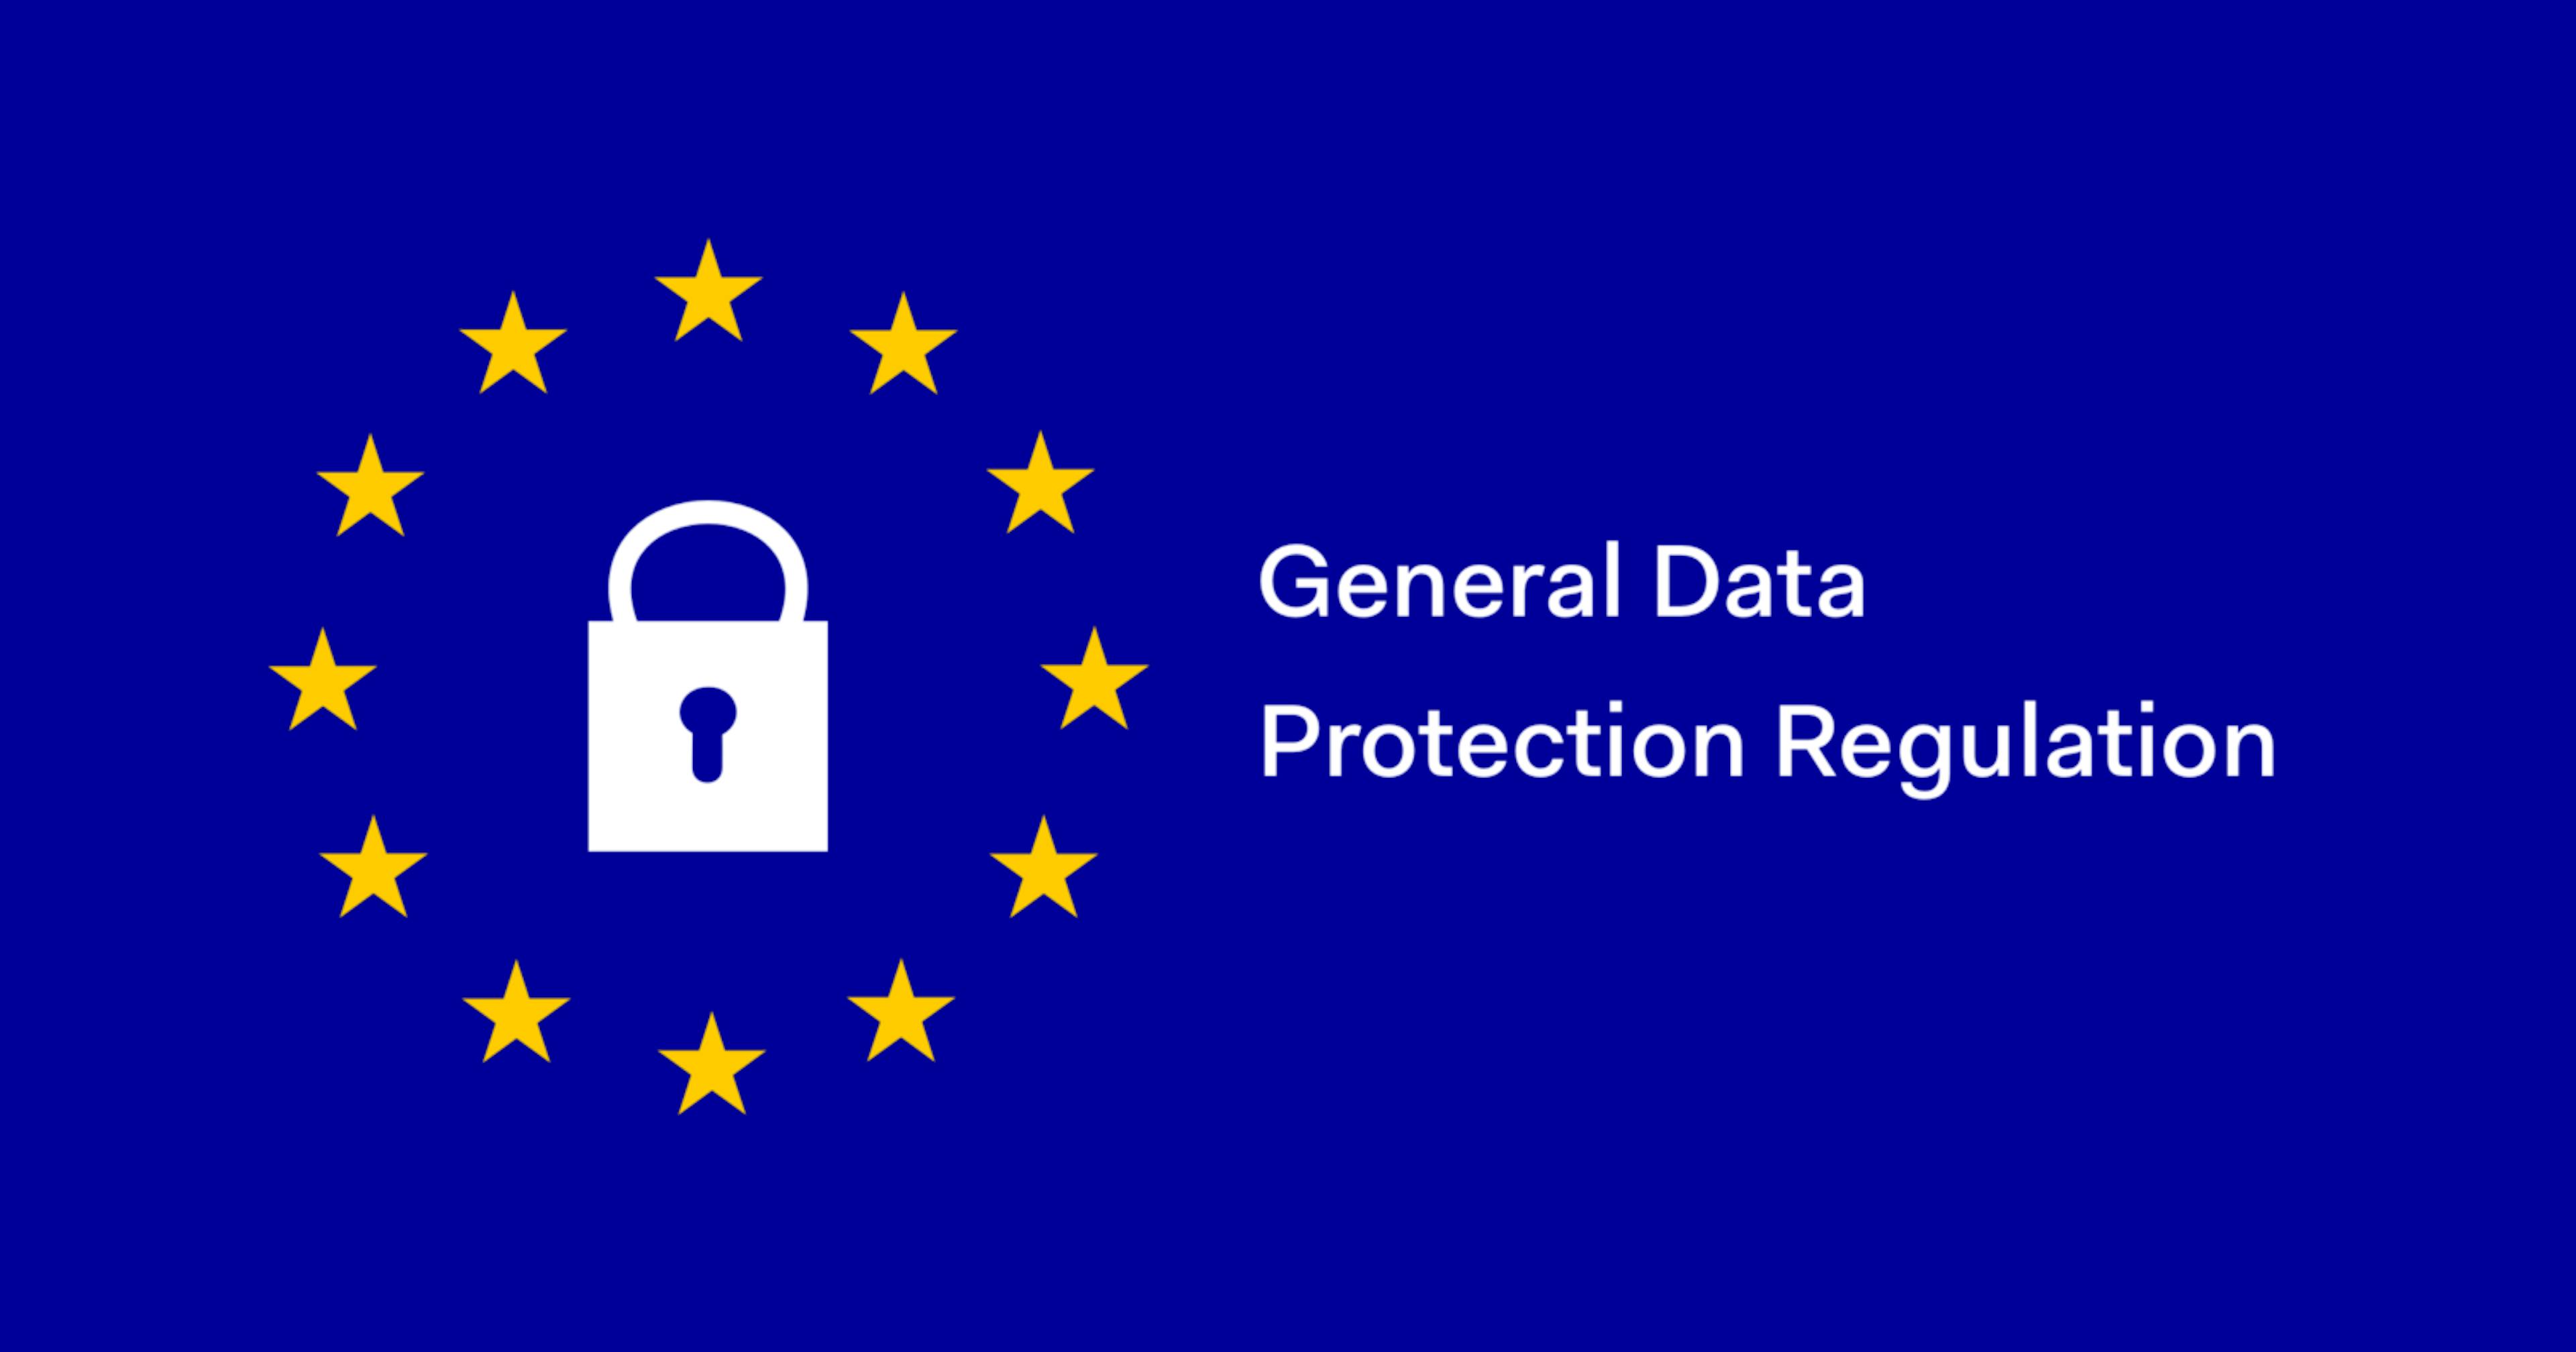 /gdpr-decoded-part-1-the-basics-23d2428afda3 feature image